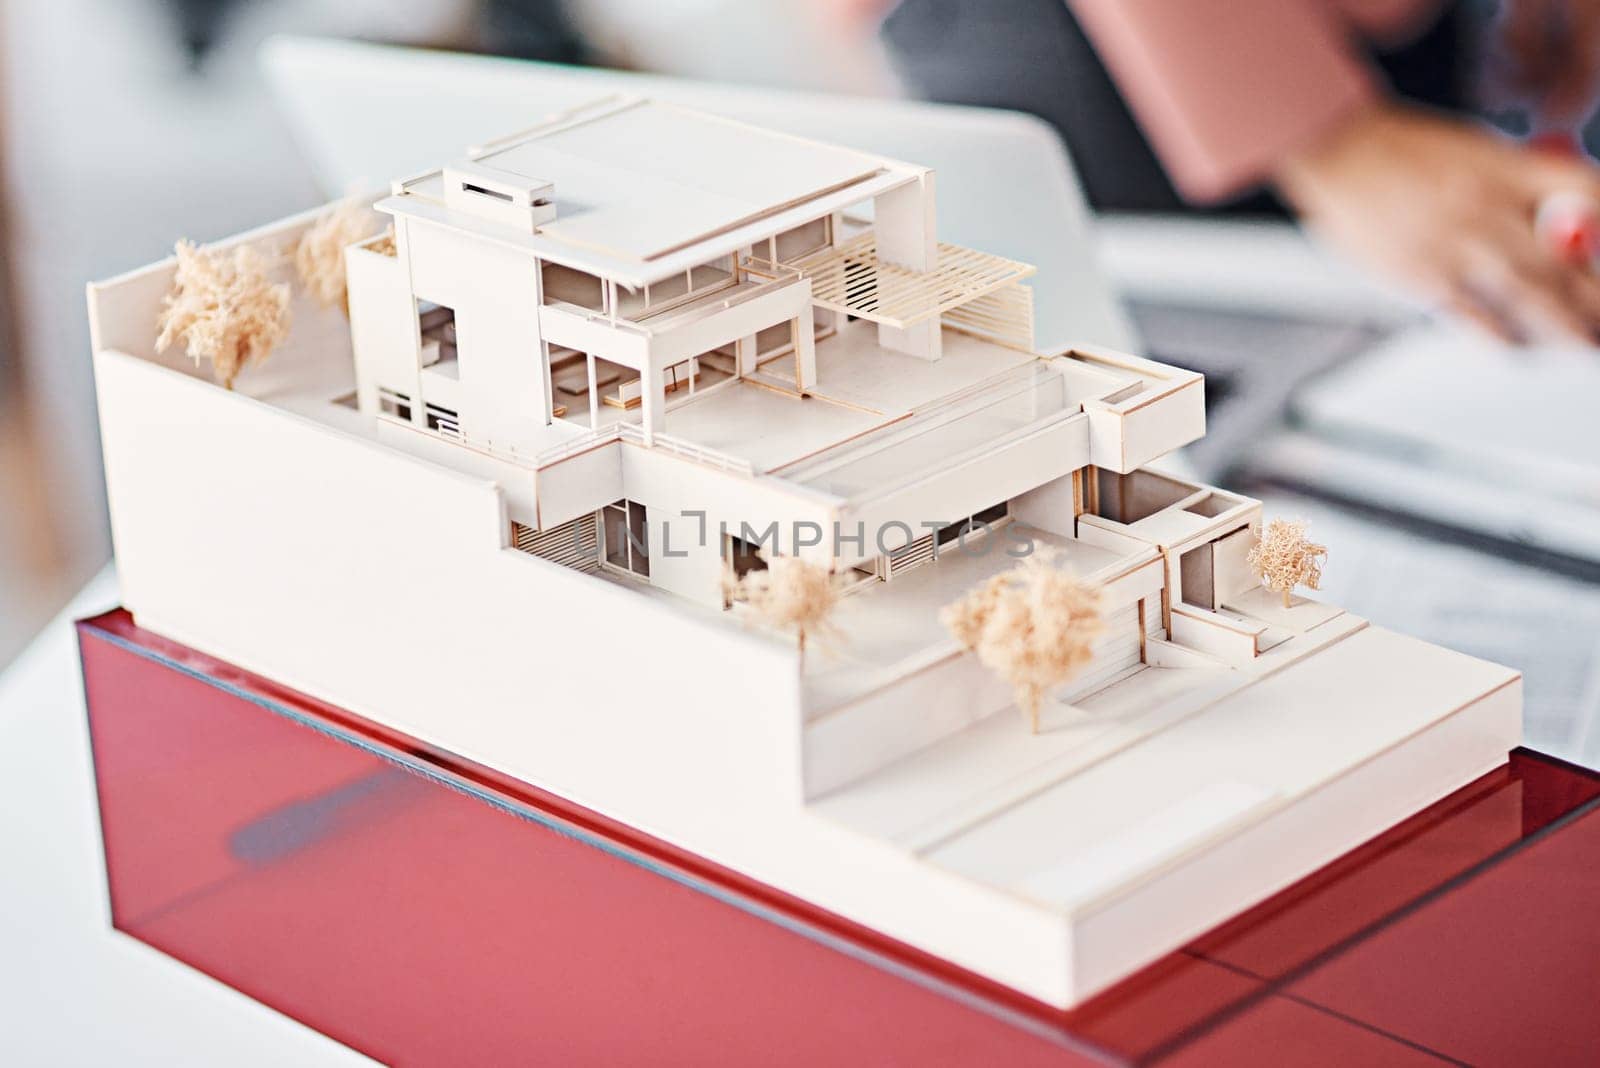 Architecture, closeup and model of modern house on desk with people, planning and vision for real estate. Design, engineering and development for property agency, expansion and presentation at office.